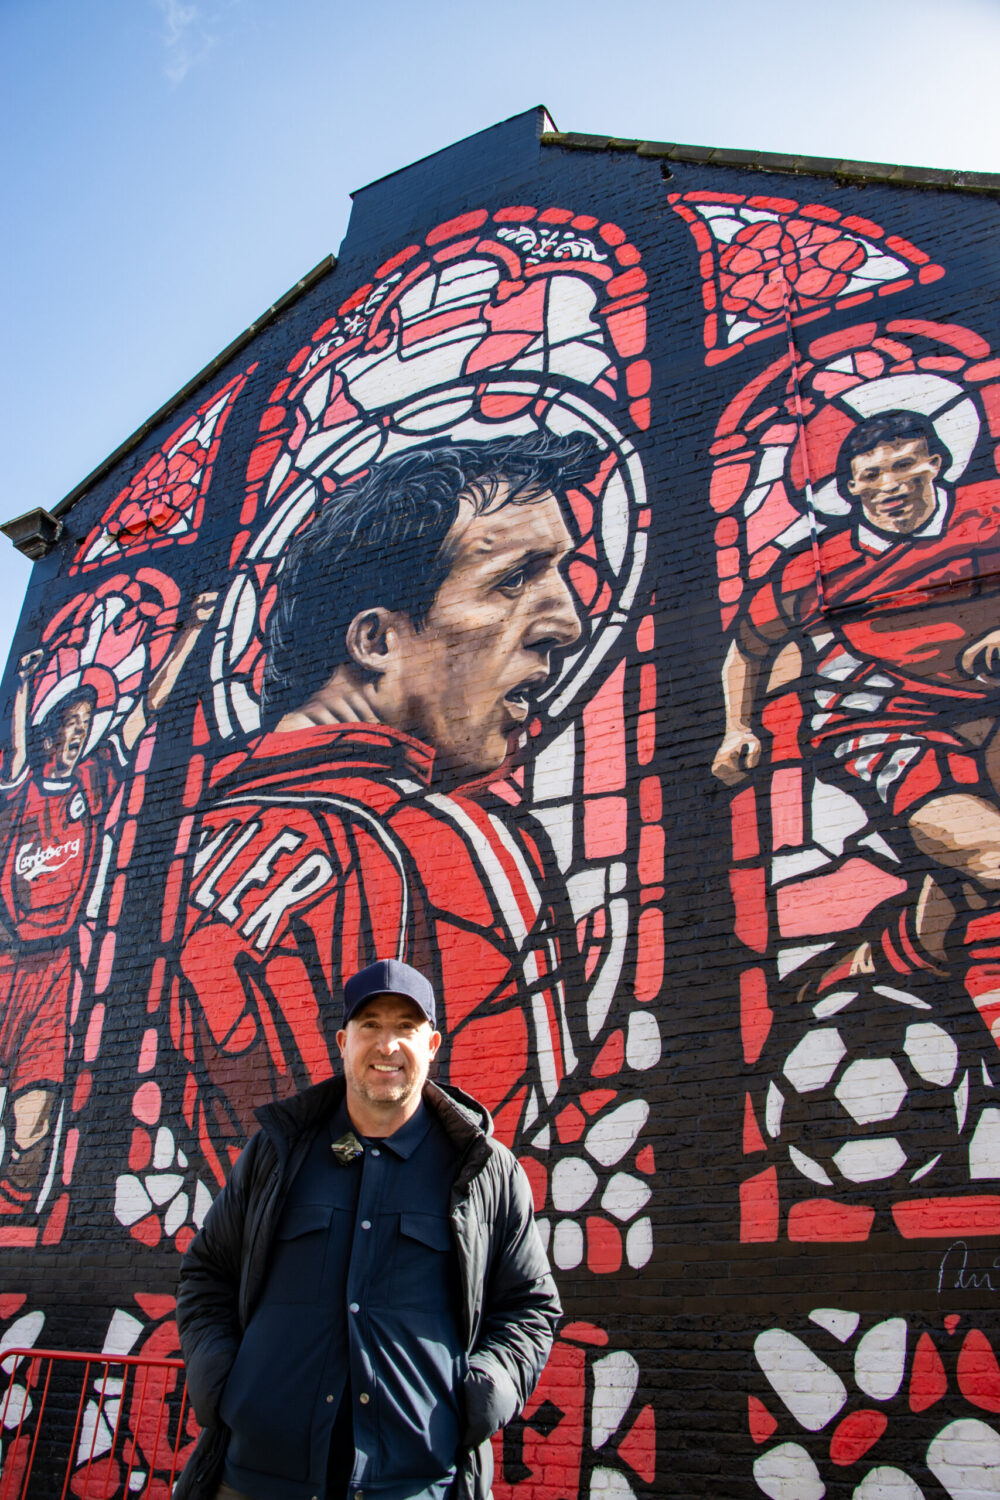 Robbie Fowler and the Anfield mural. Credit: Courtney Neary